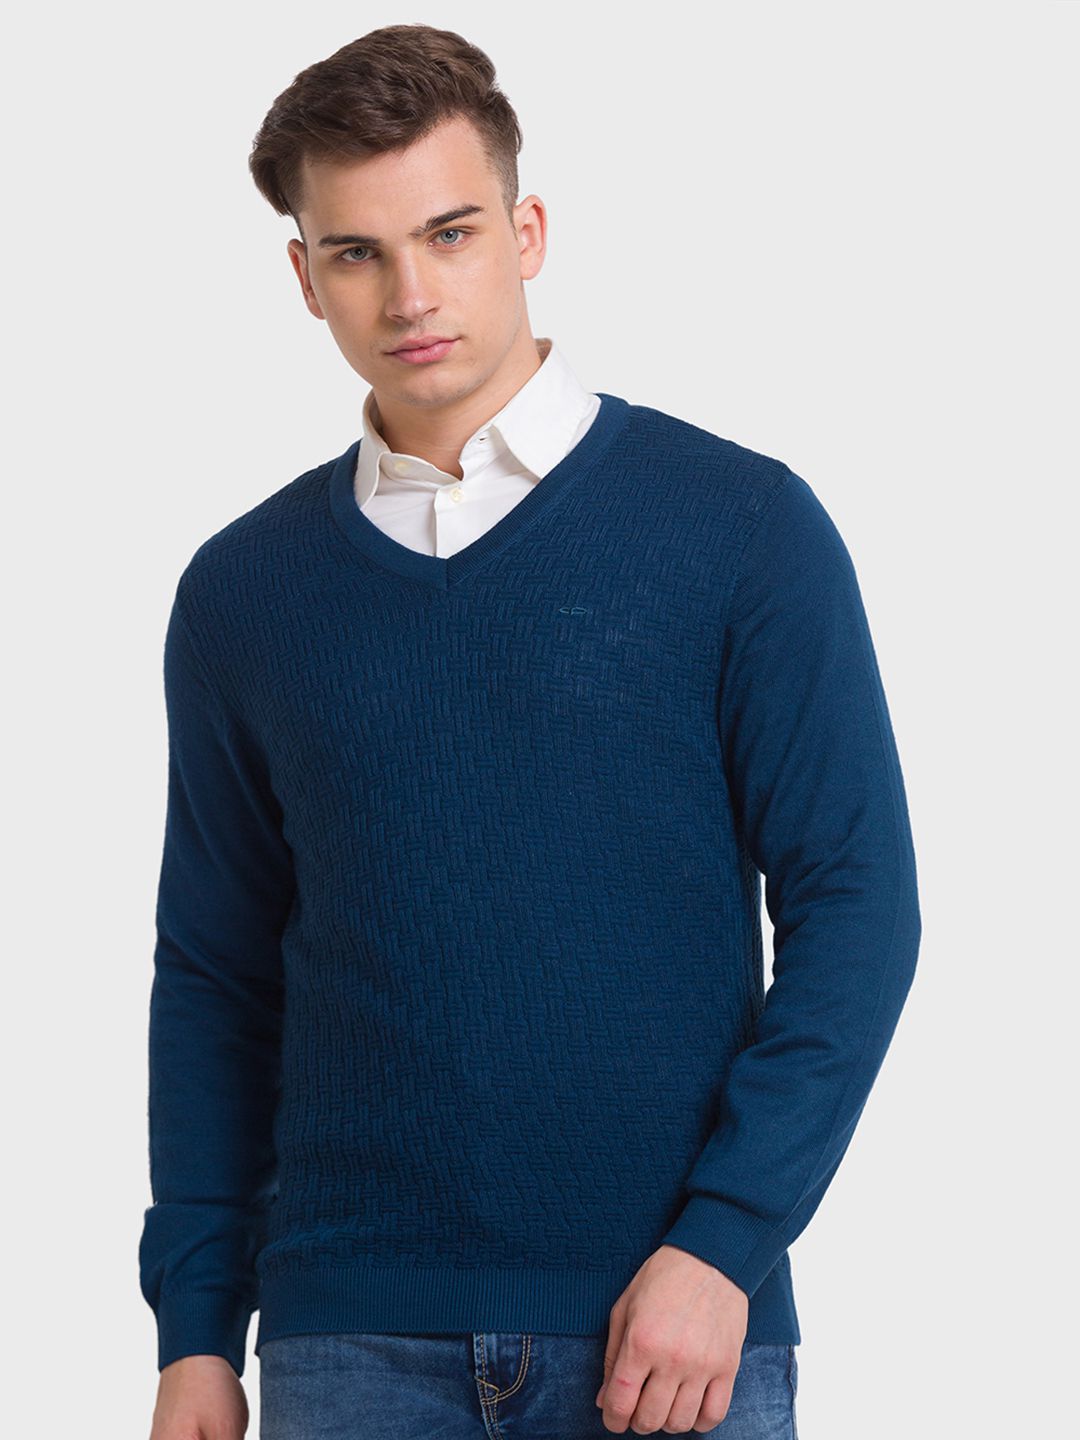     			Colorplus Acrylic V-Neck Men's Full Sleeves Pullover Sweater - Blue ( Pack of 1 )